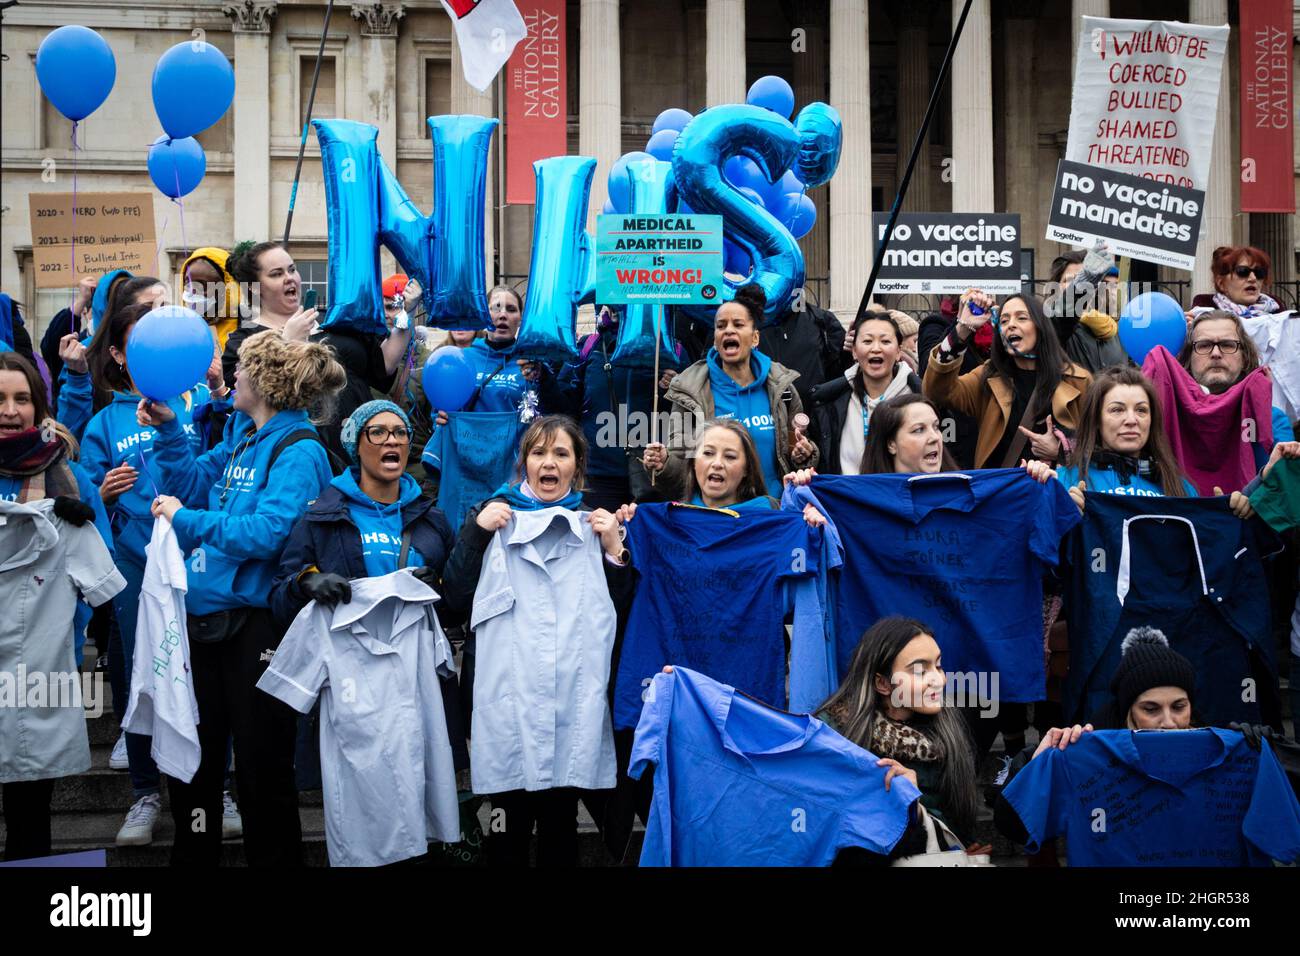 London, UK. 22nd Jan, 2022. As the mandate to get vaccinated against COVID-19 draws ever closer NHS workers join the protest. The anti-lockdown demonstration was organised by the World Wide Rally For Freedom movement. Credit: Andy Barton/Alamy Live News Stock Photo